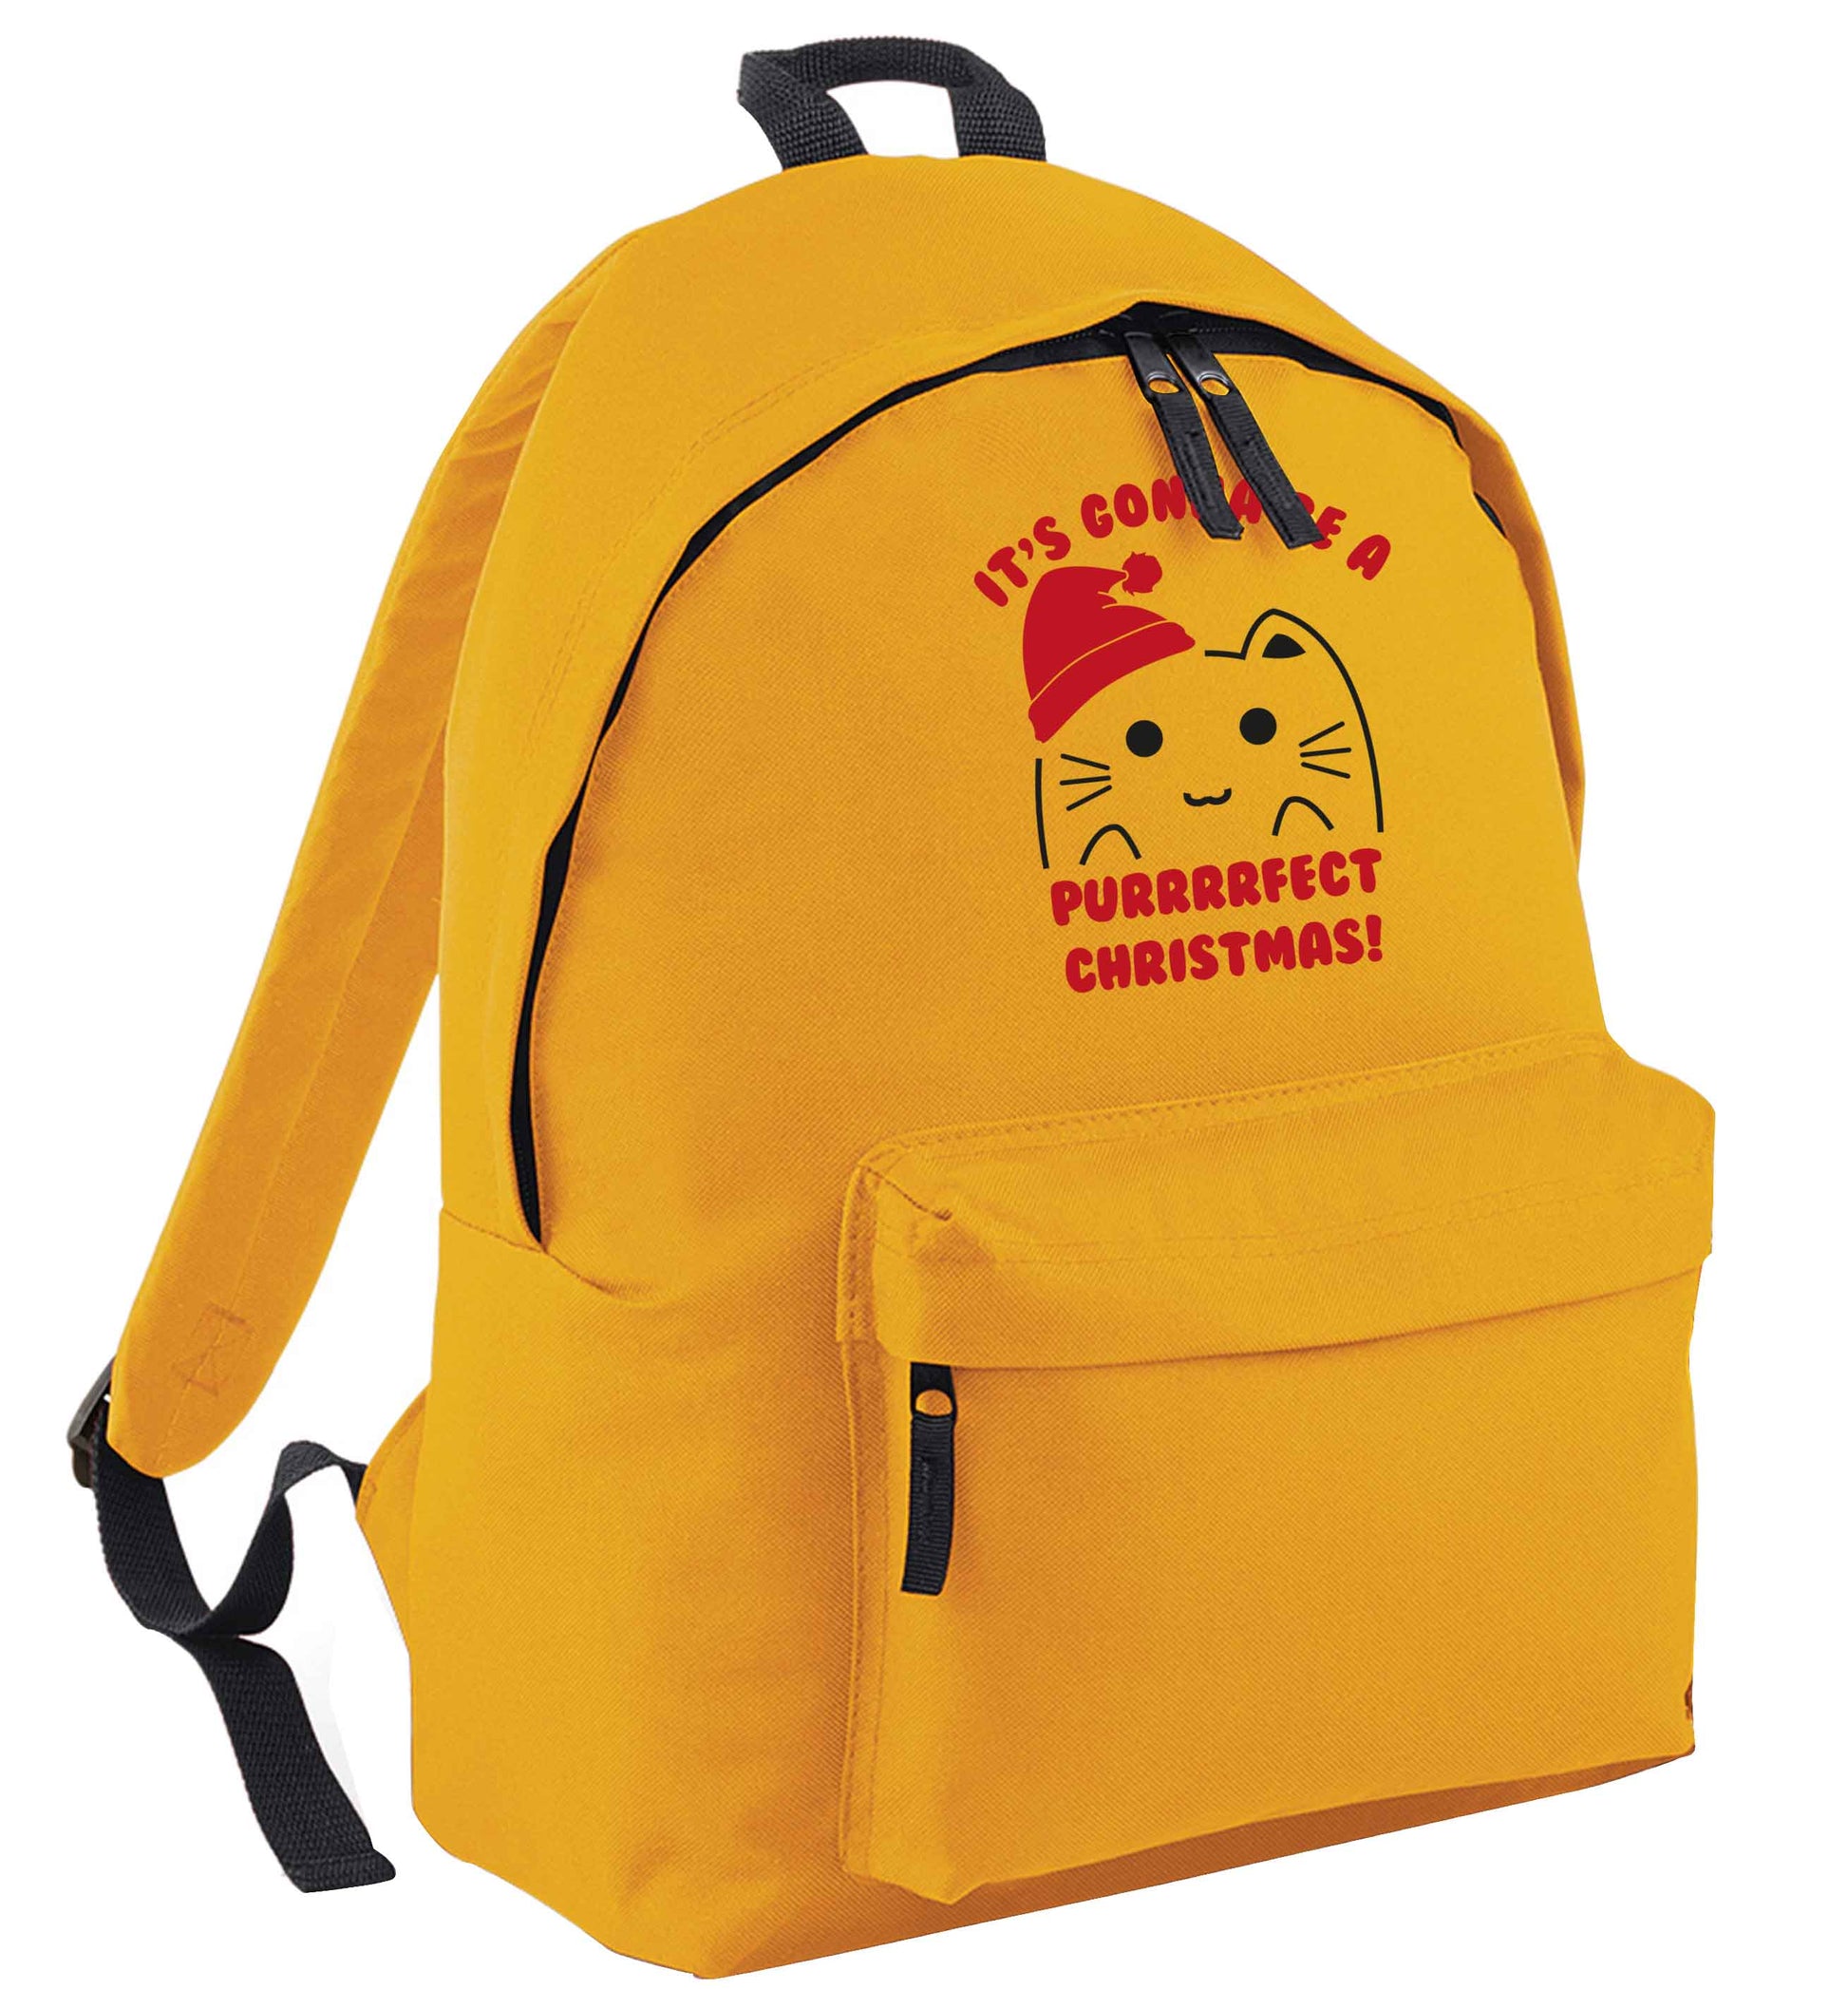 It's going to be a purrfect Christmas mustard adults backpack